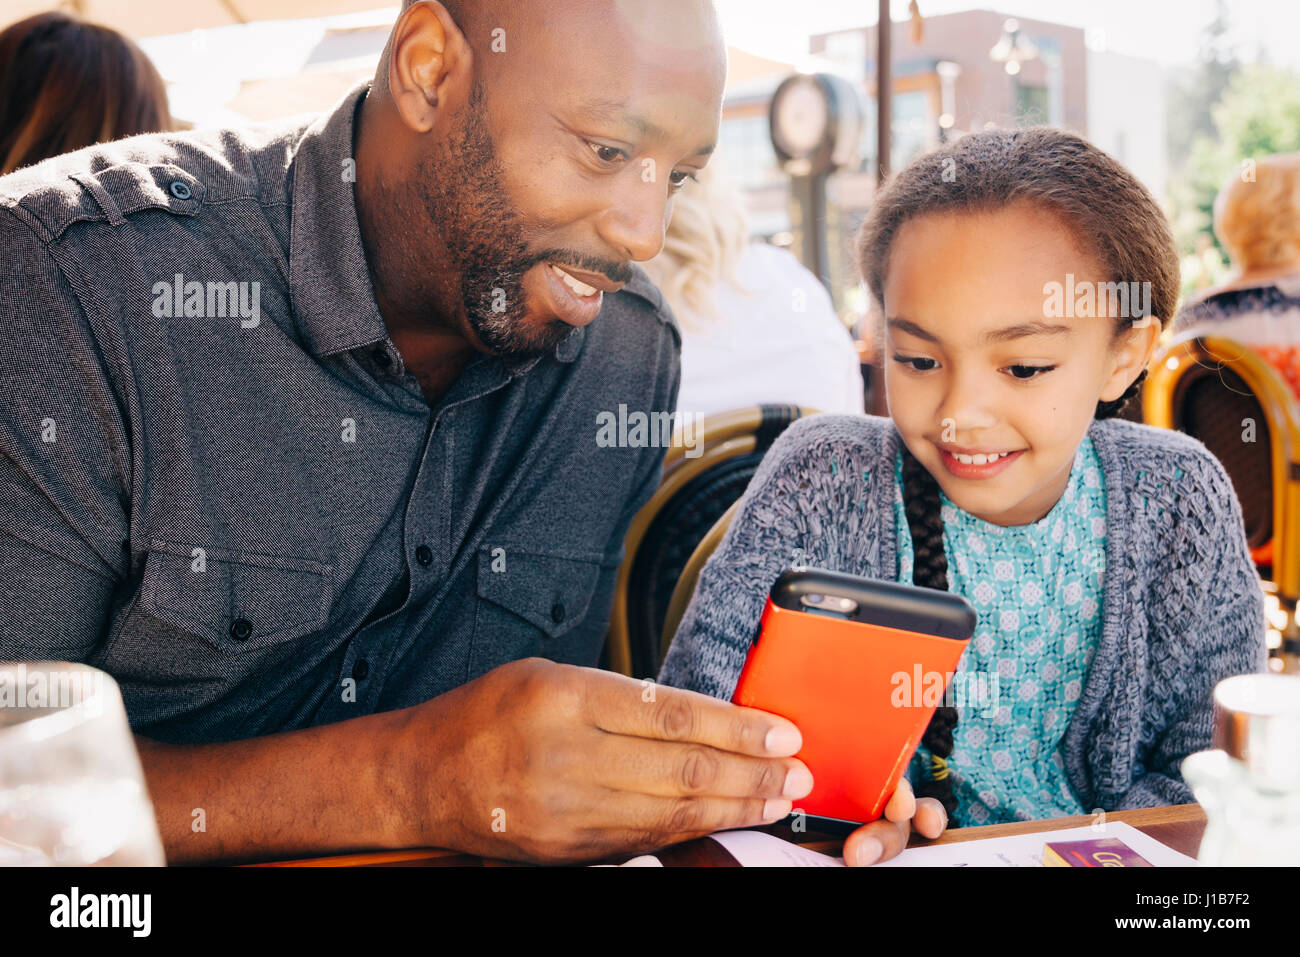 Father and daughter sitting at restaurant table texting on cell phone Stock Photo